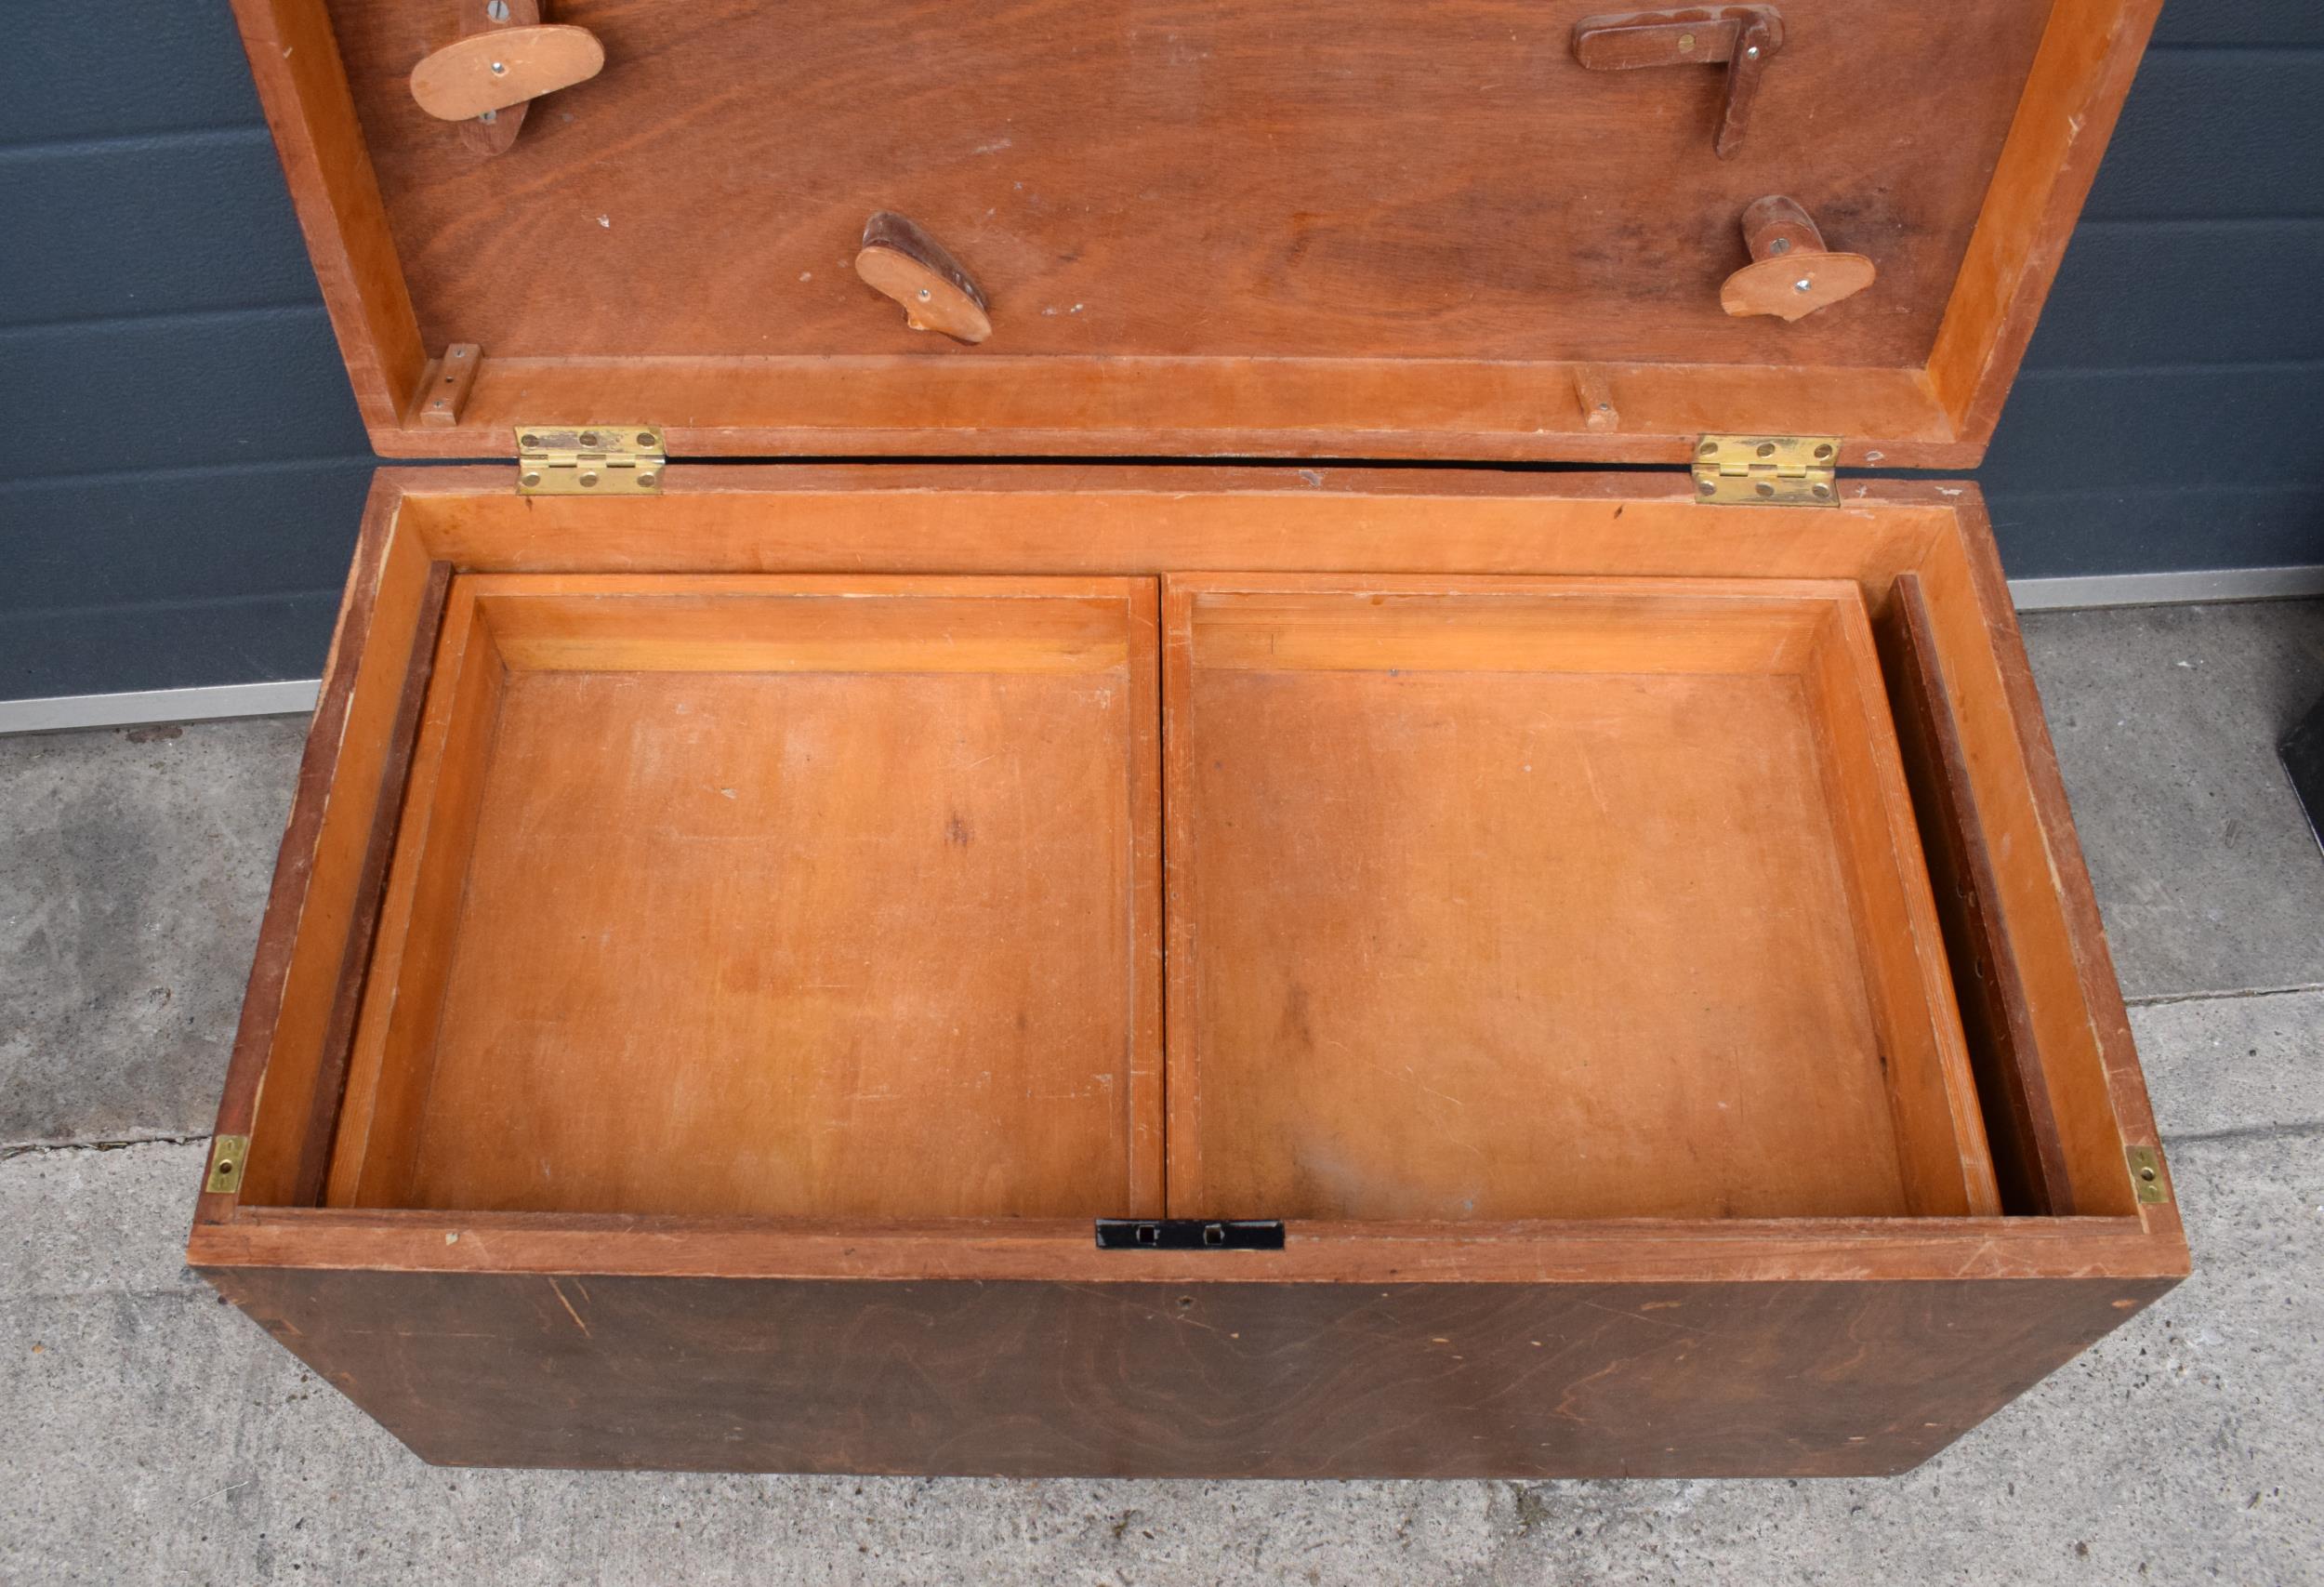 Vintage wooden tool box on caster wheels with pull out drawers, 84 x 43 x 48cm tall. - Image 6 of 6